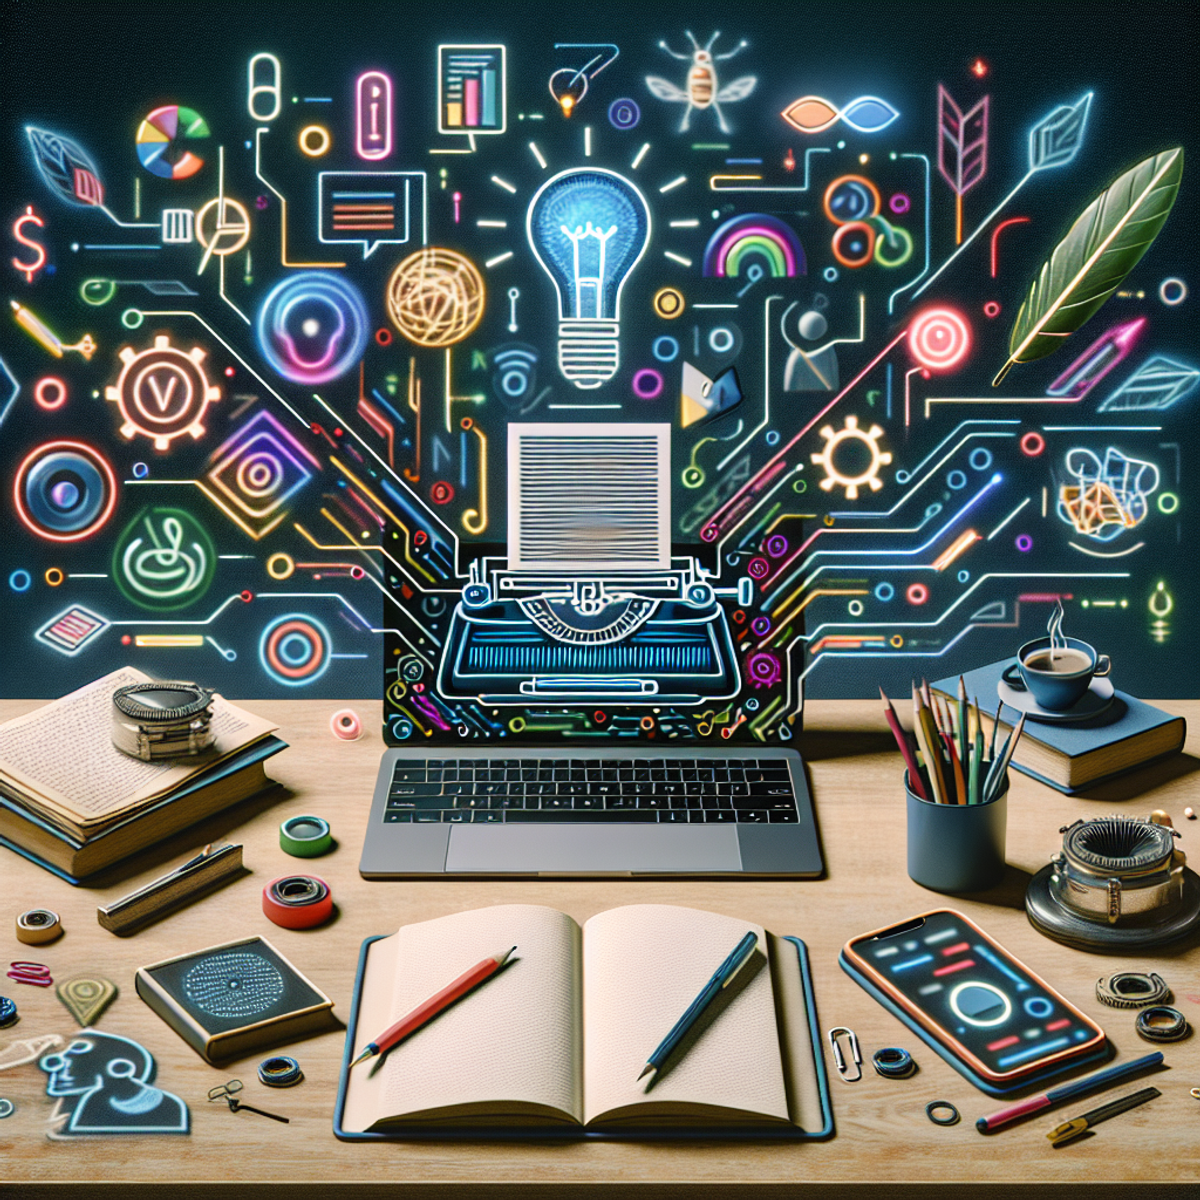 A cluttered desk with a laptop surrounded by colorful, modern AI tools and abstract symbols representing writing elements like grammar and SEO.